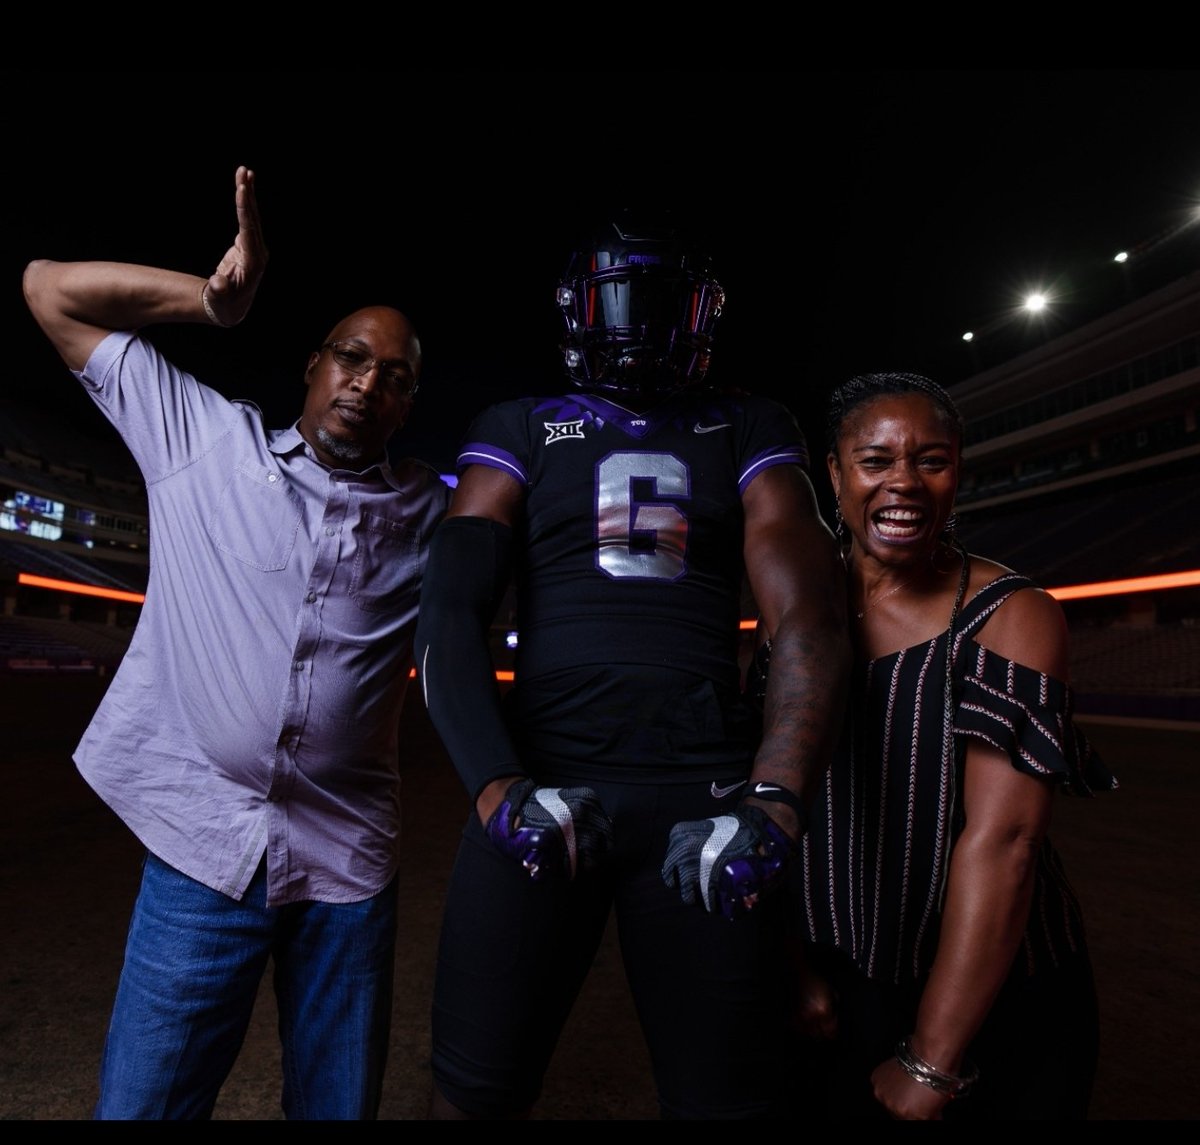 Congrats @TCUFootball on reppin that @Big12Conference from @itszachszn and The Chapman Family #FiestaFrogs #DFWBig12Team